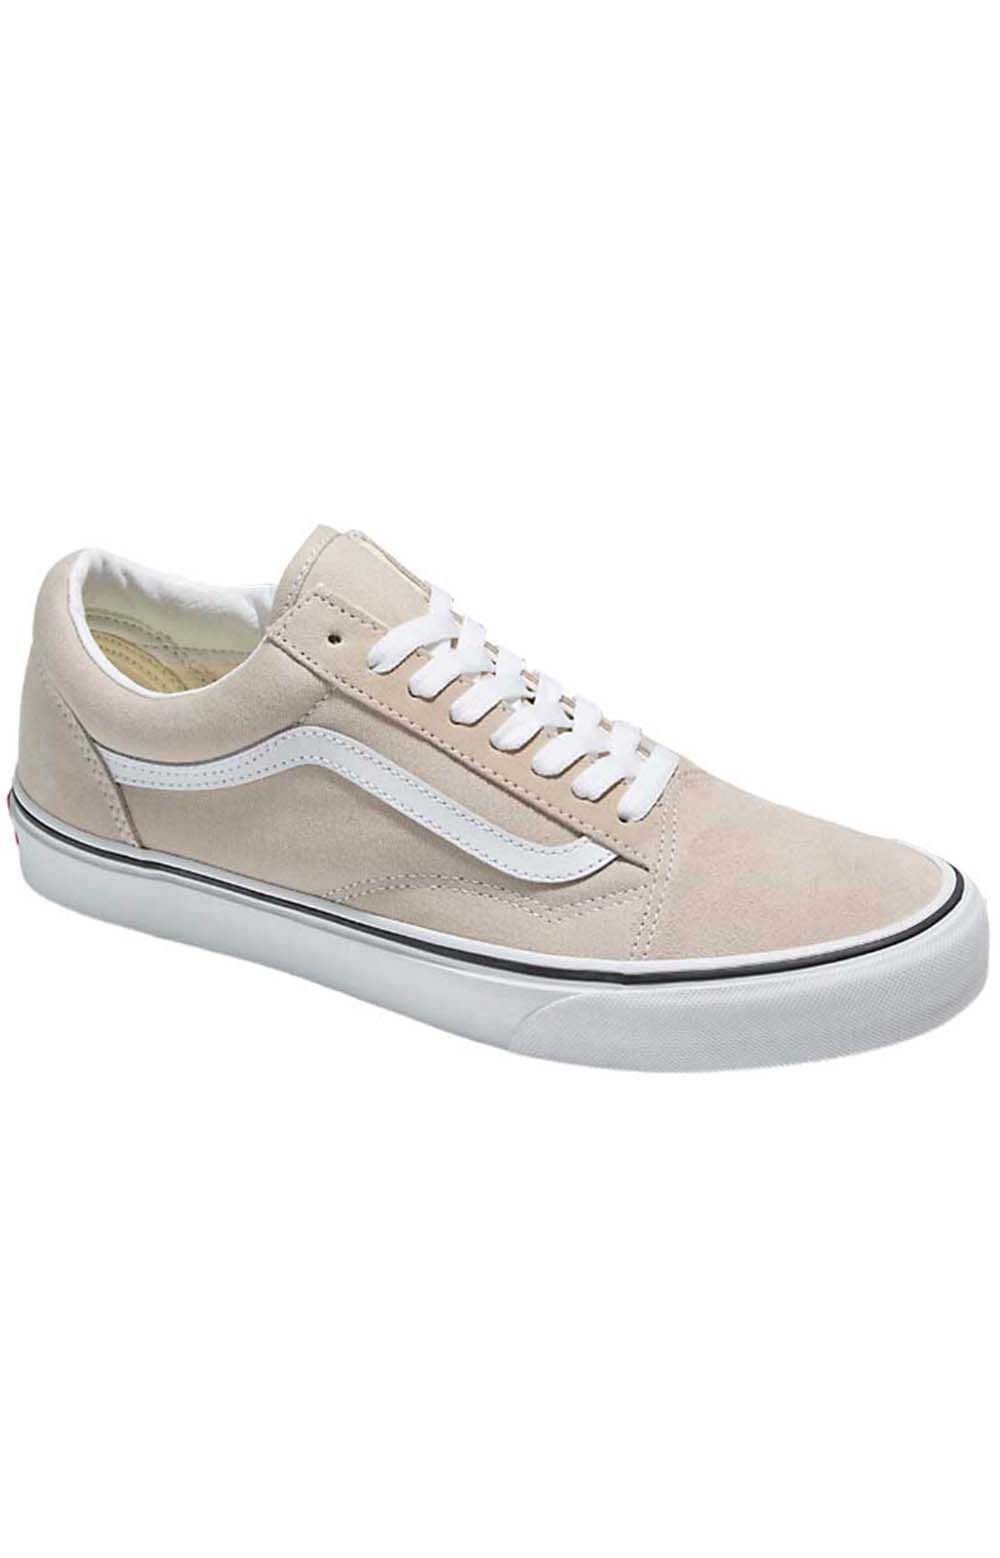 (5UFBLL) Color Theory Old Skool Shoes - French Oak